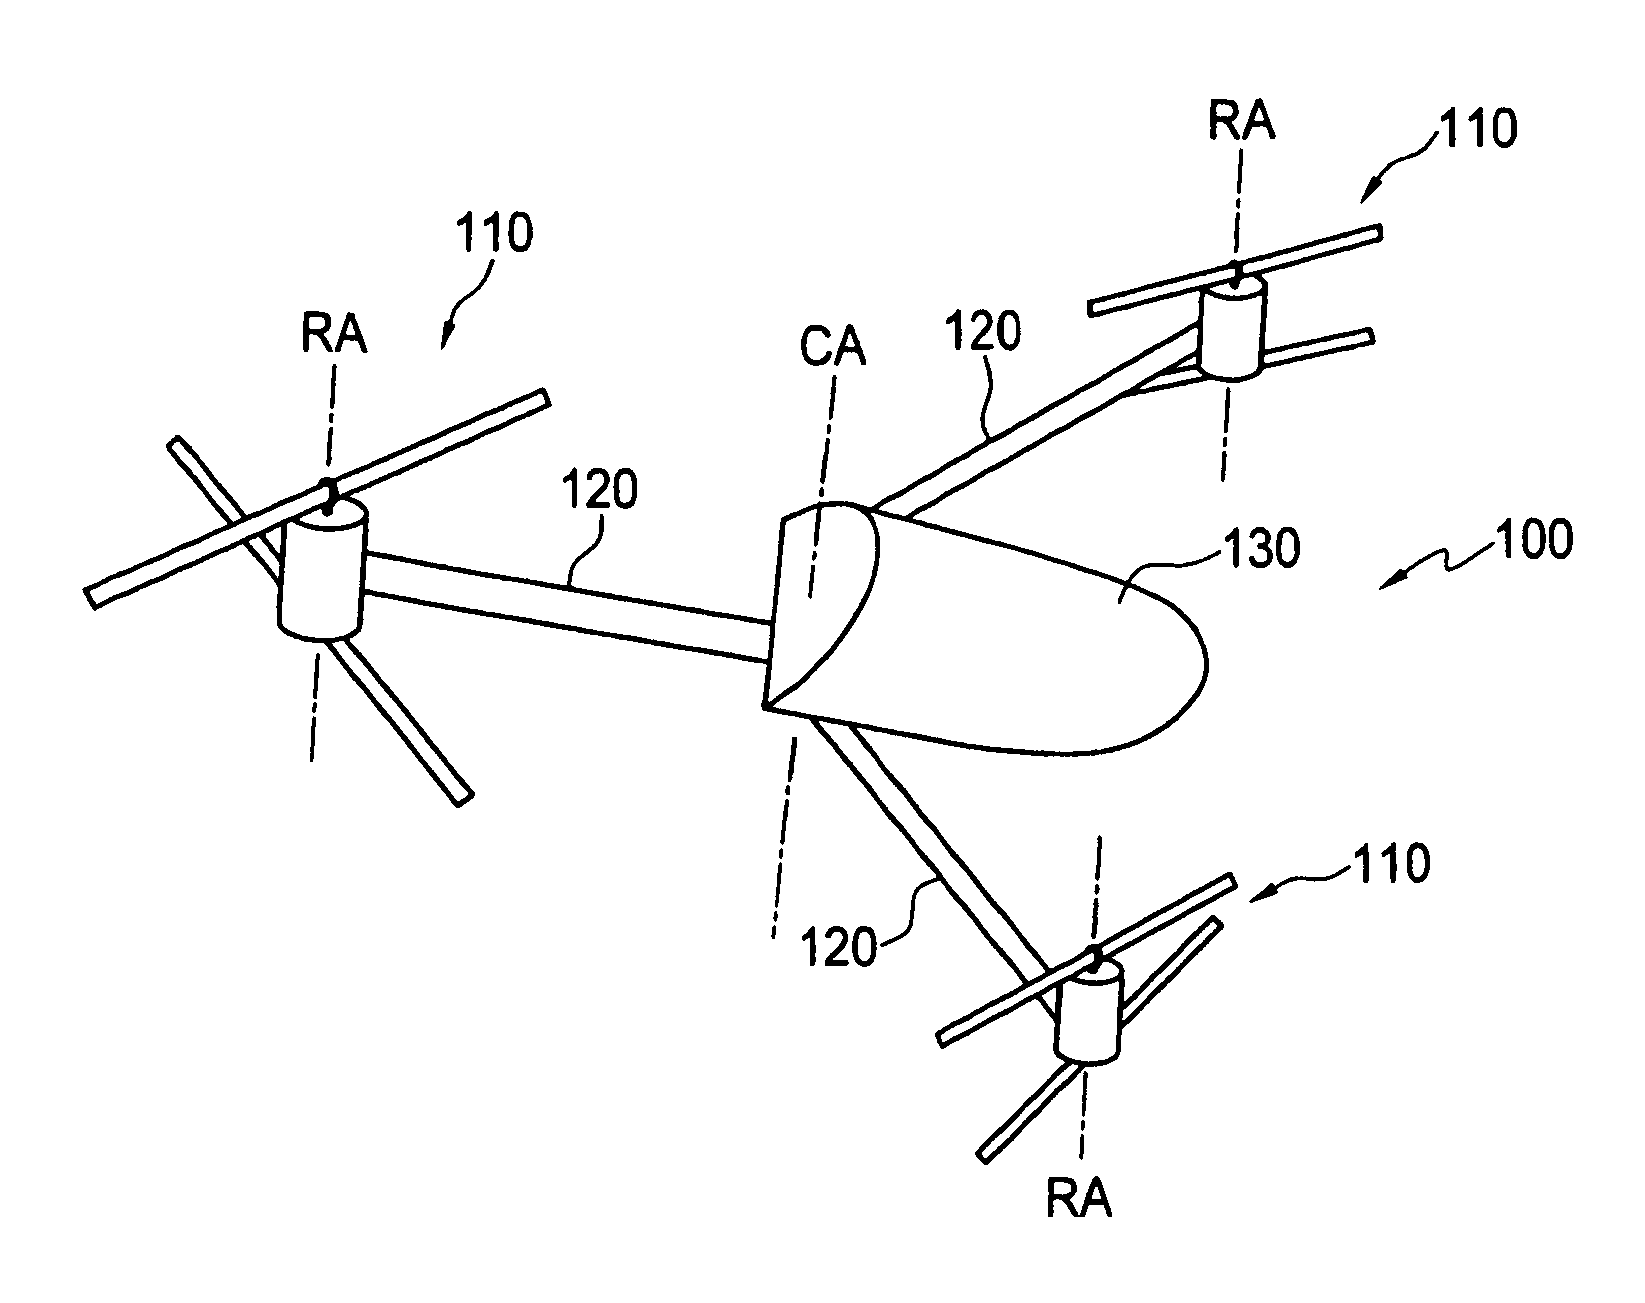 Dual rotor helicopter with tilted rotational axes